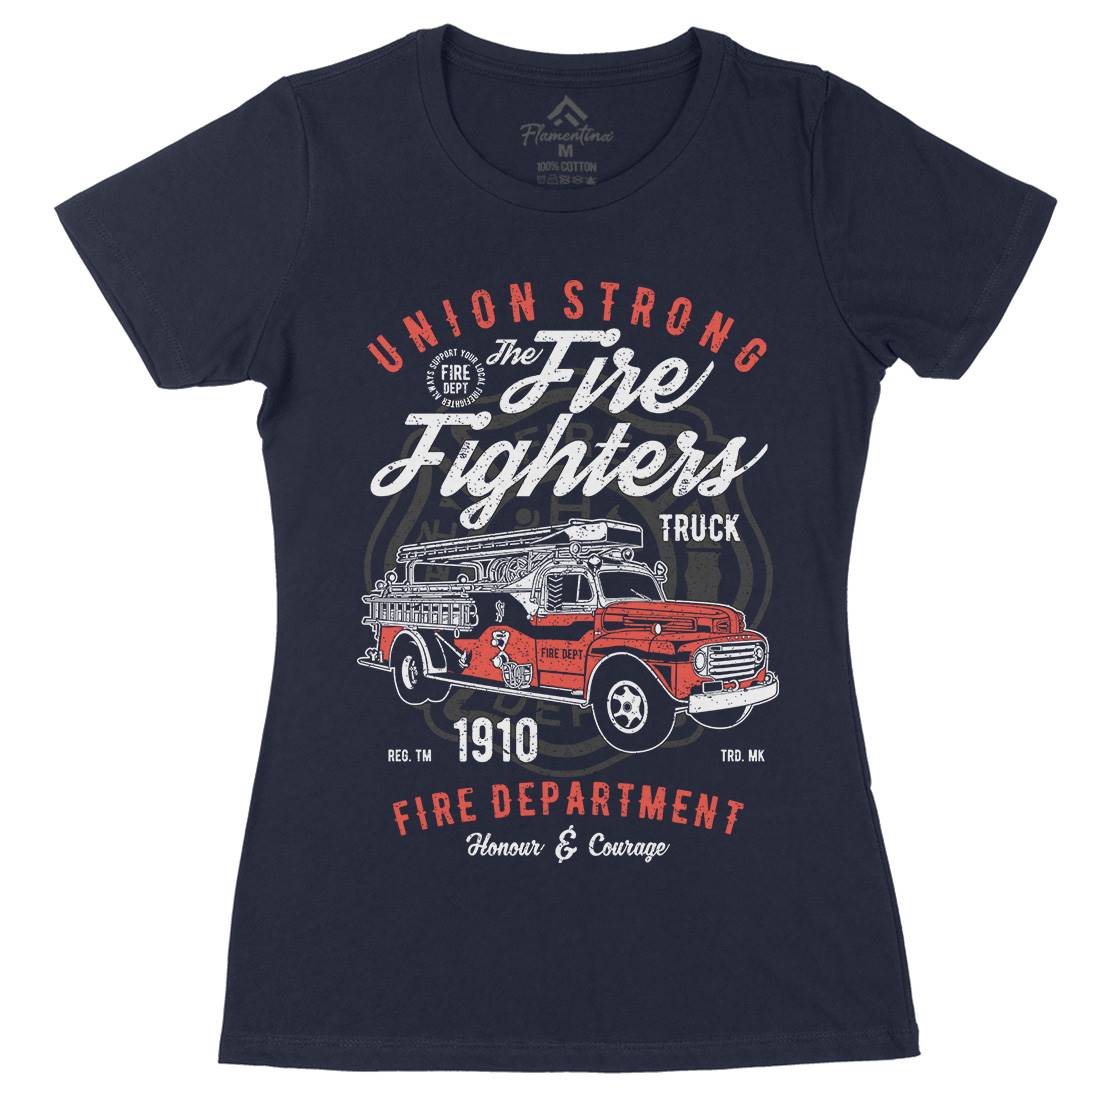 Union Strong Womens Organic Crew Neck T-Shirt Firefighters A781